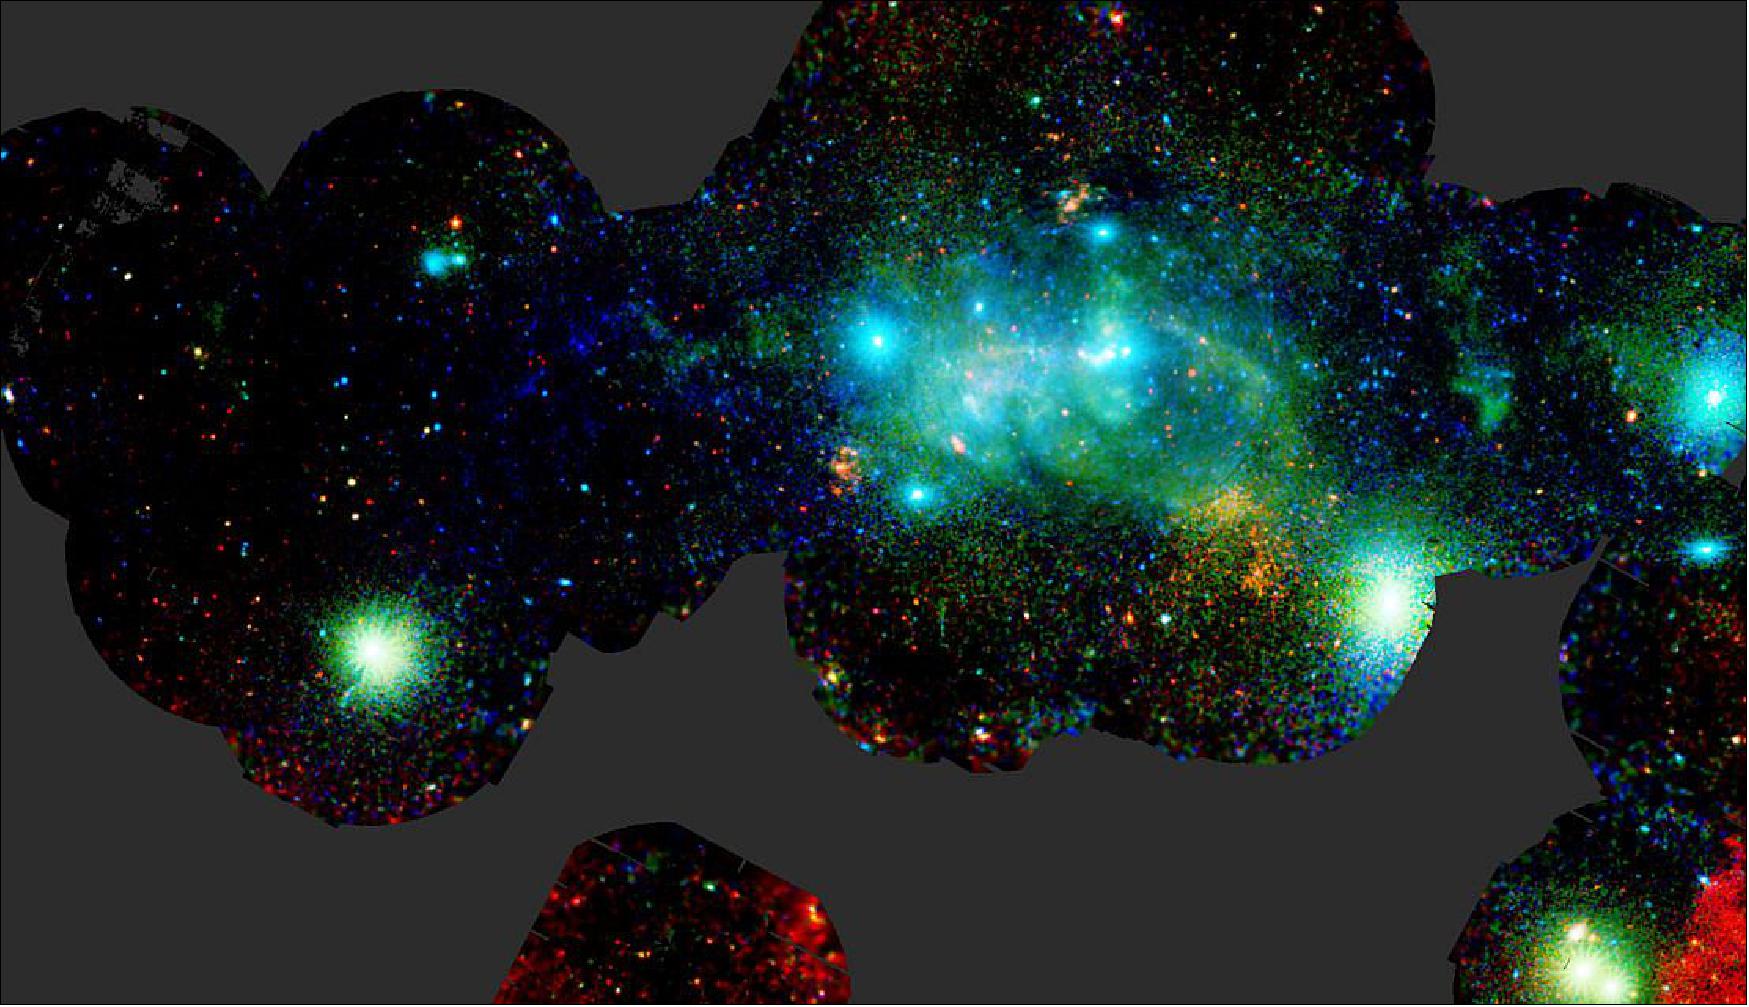 Figure 112: The central regions of our galaxy, the Milky Way, seen in X-rays by ESA’s XMM-Newton X-ray observatory (image credit: ESA/XMM-Newton, G. Ponti et al., 2015)